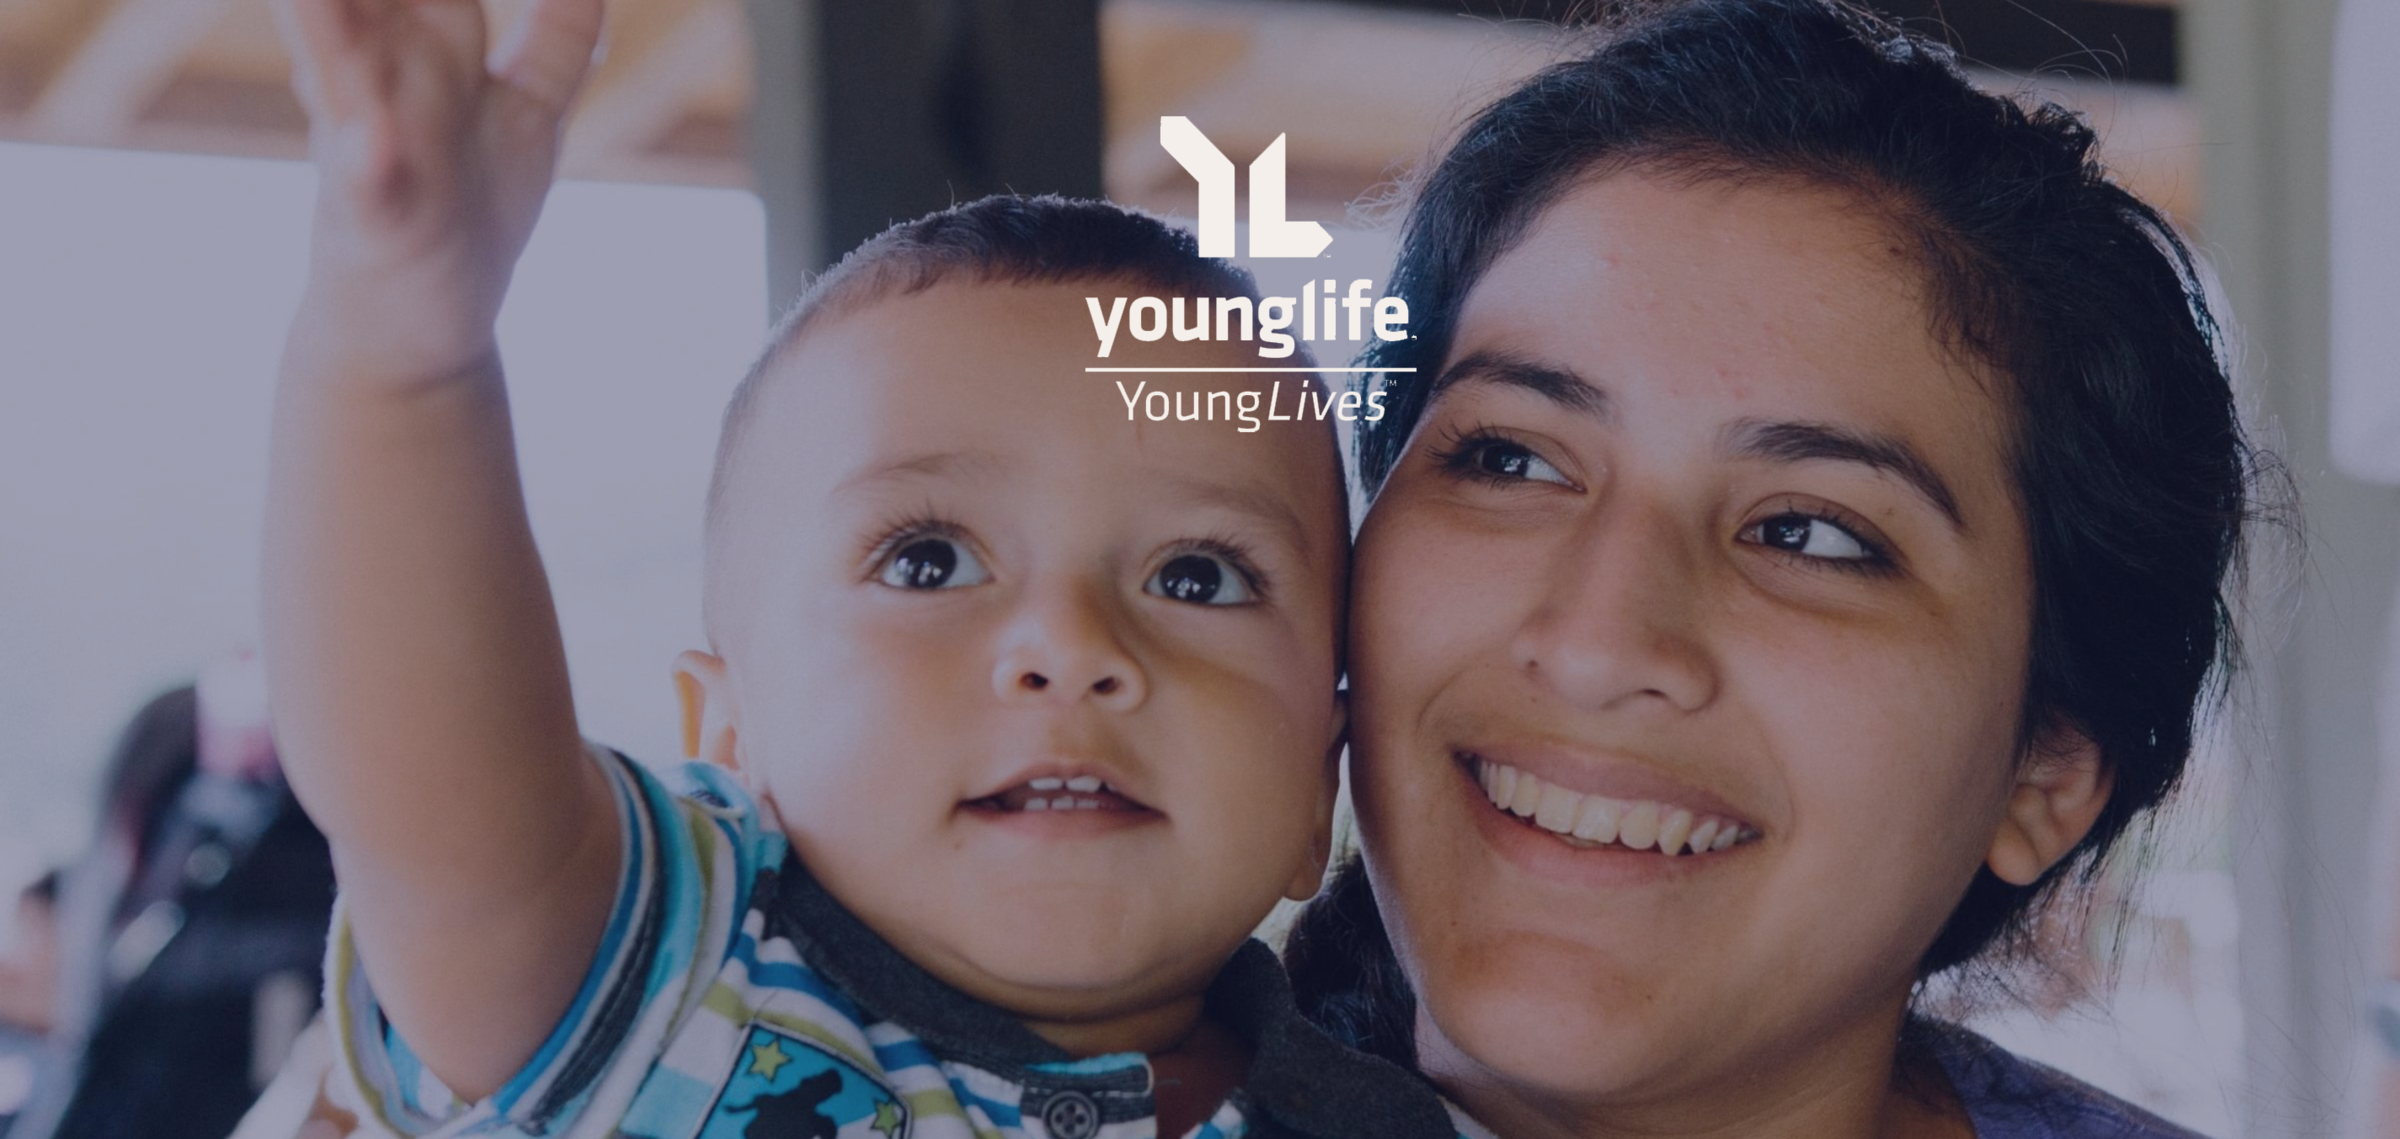 Rotary - ACRC - Website - Image - YoungLife